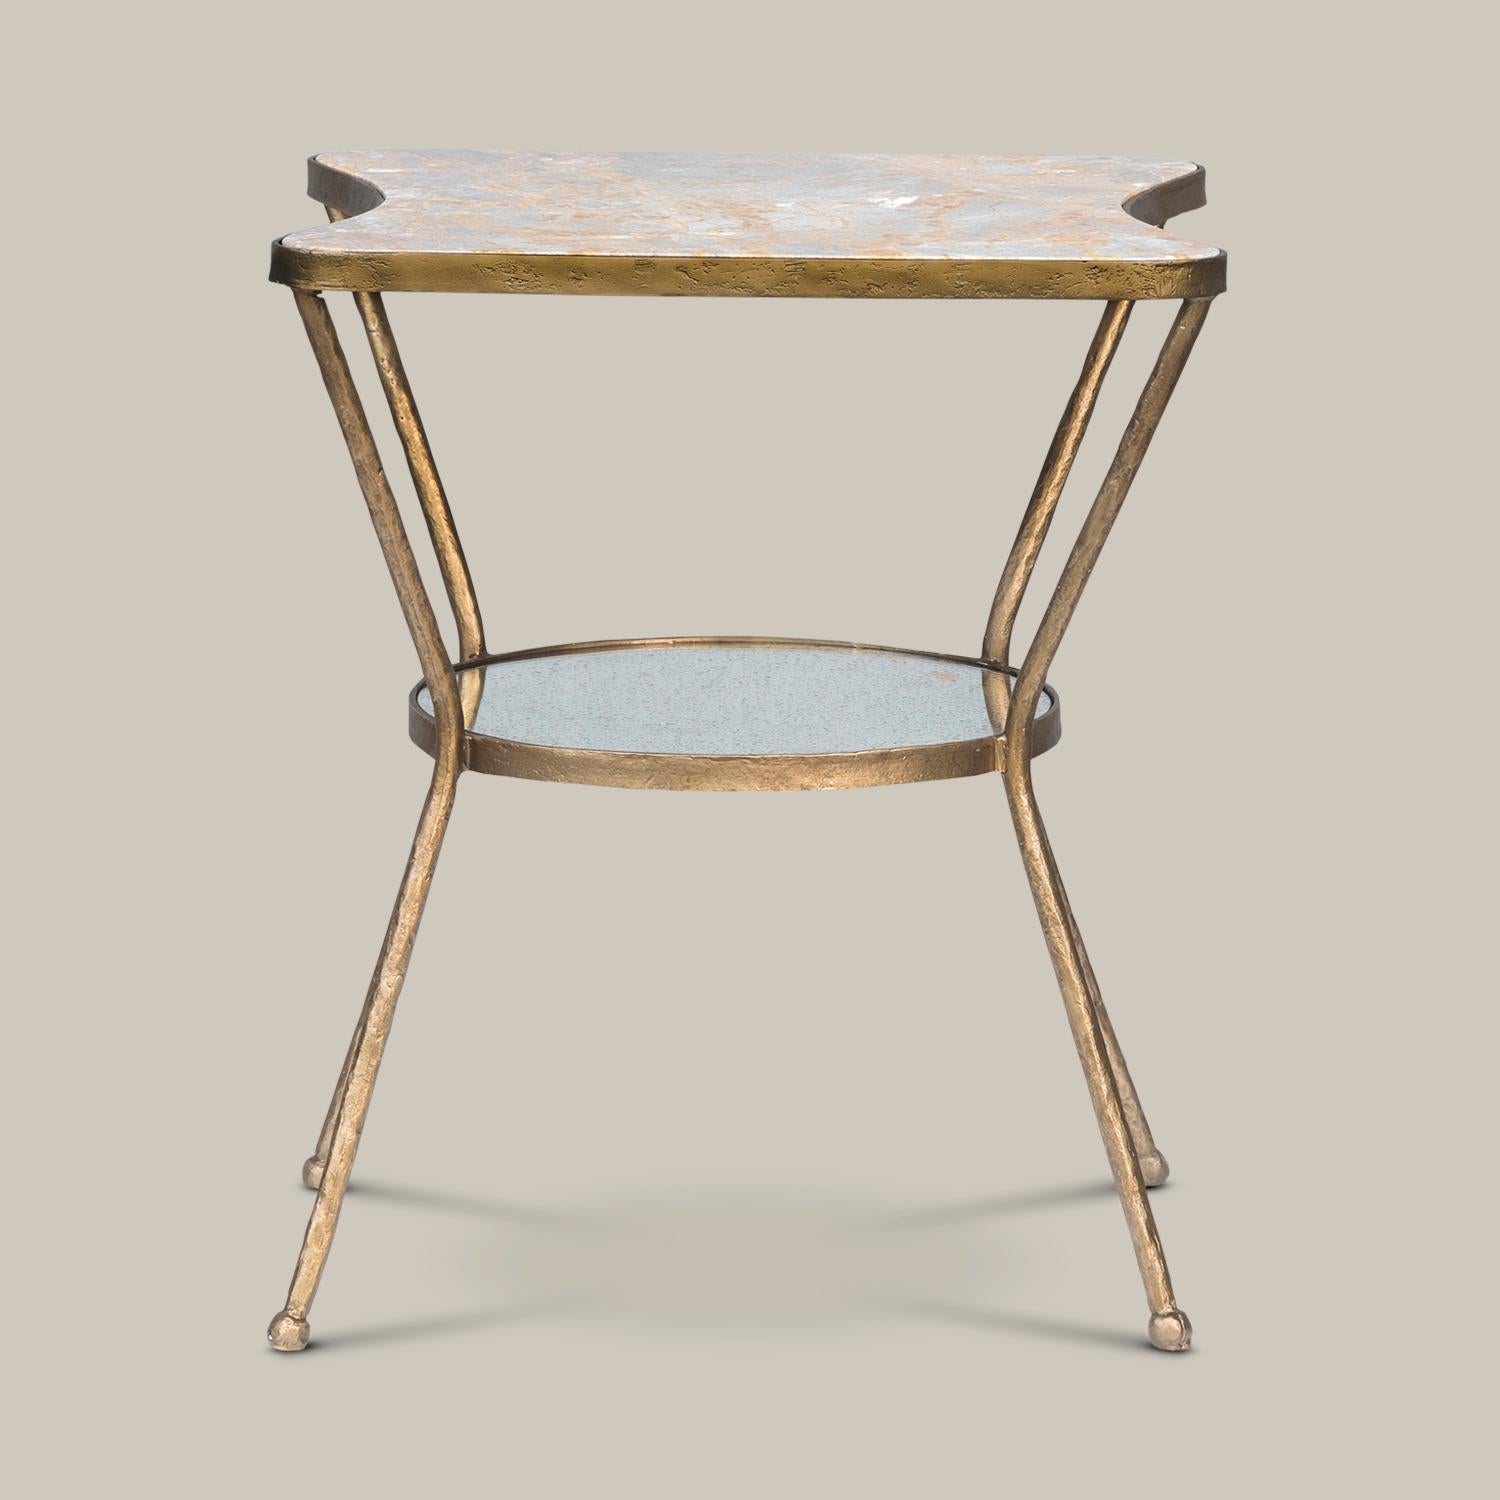 Blush marble top, hammered antique brass, and reflective antique mirror form a delicate silhouette with strong lines in this side table. Handmade by artisans in Vietnam, this side adds a gorgeous element to any space.